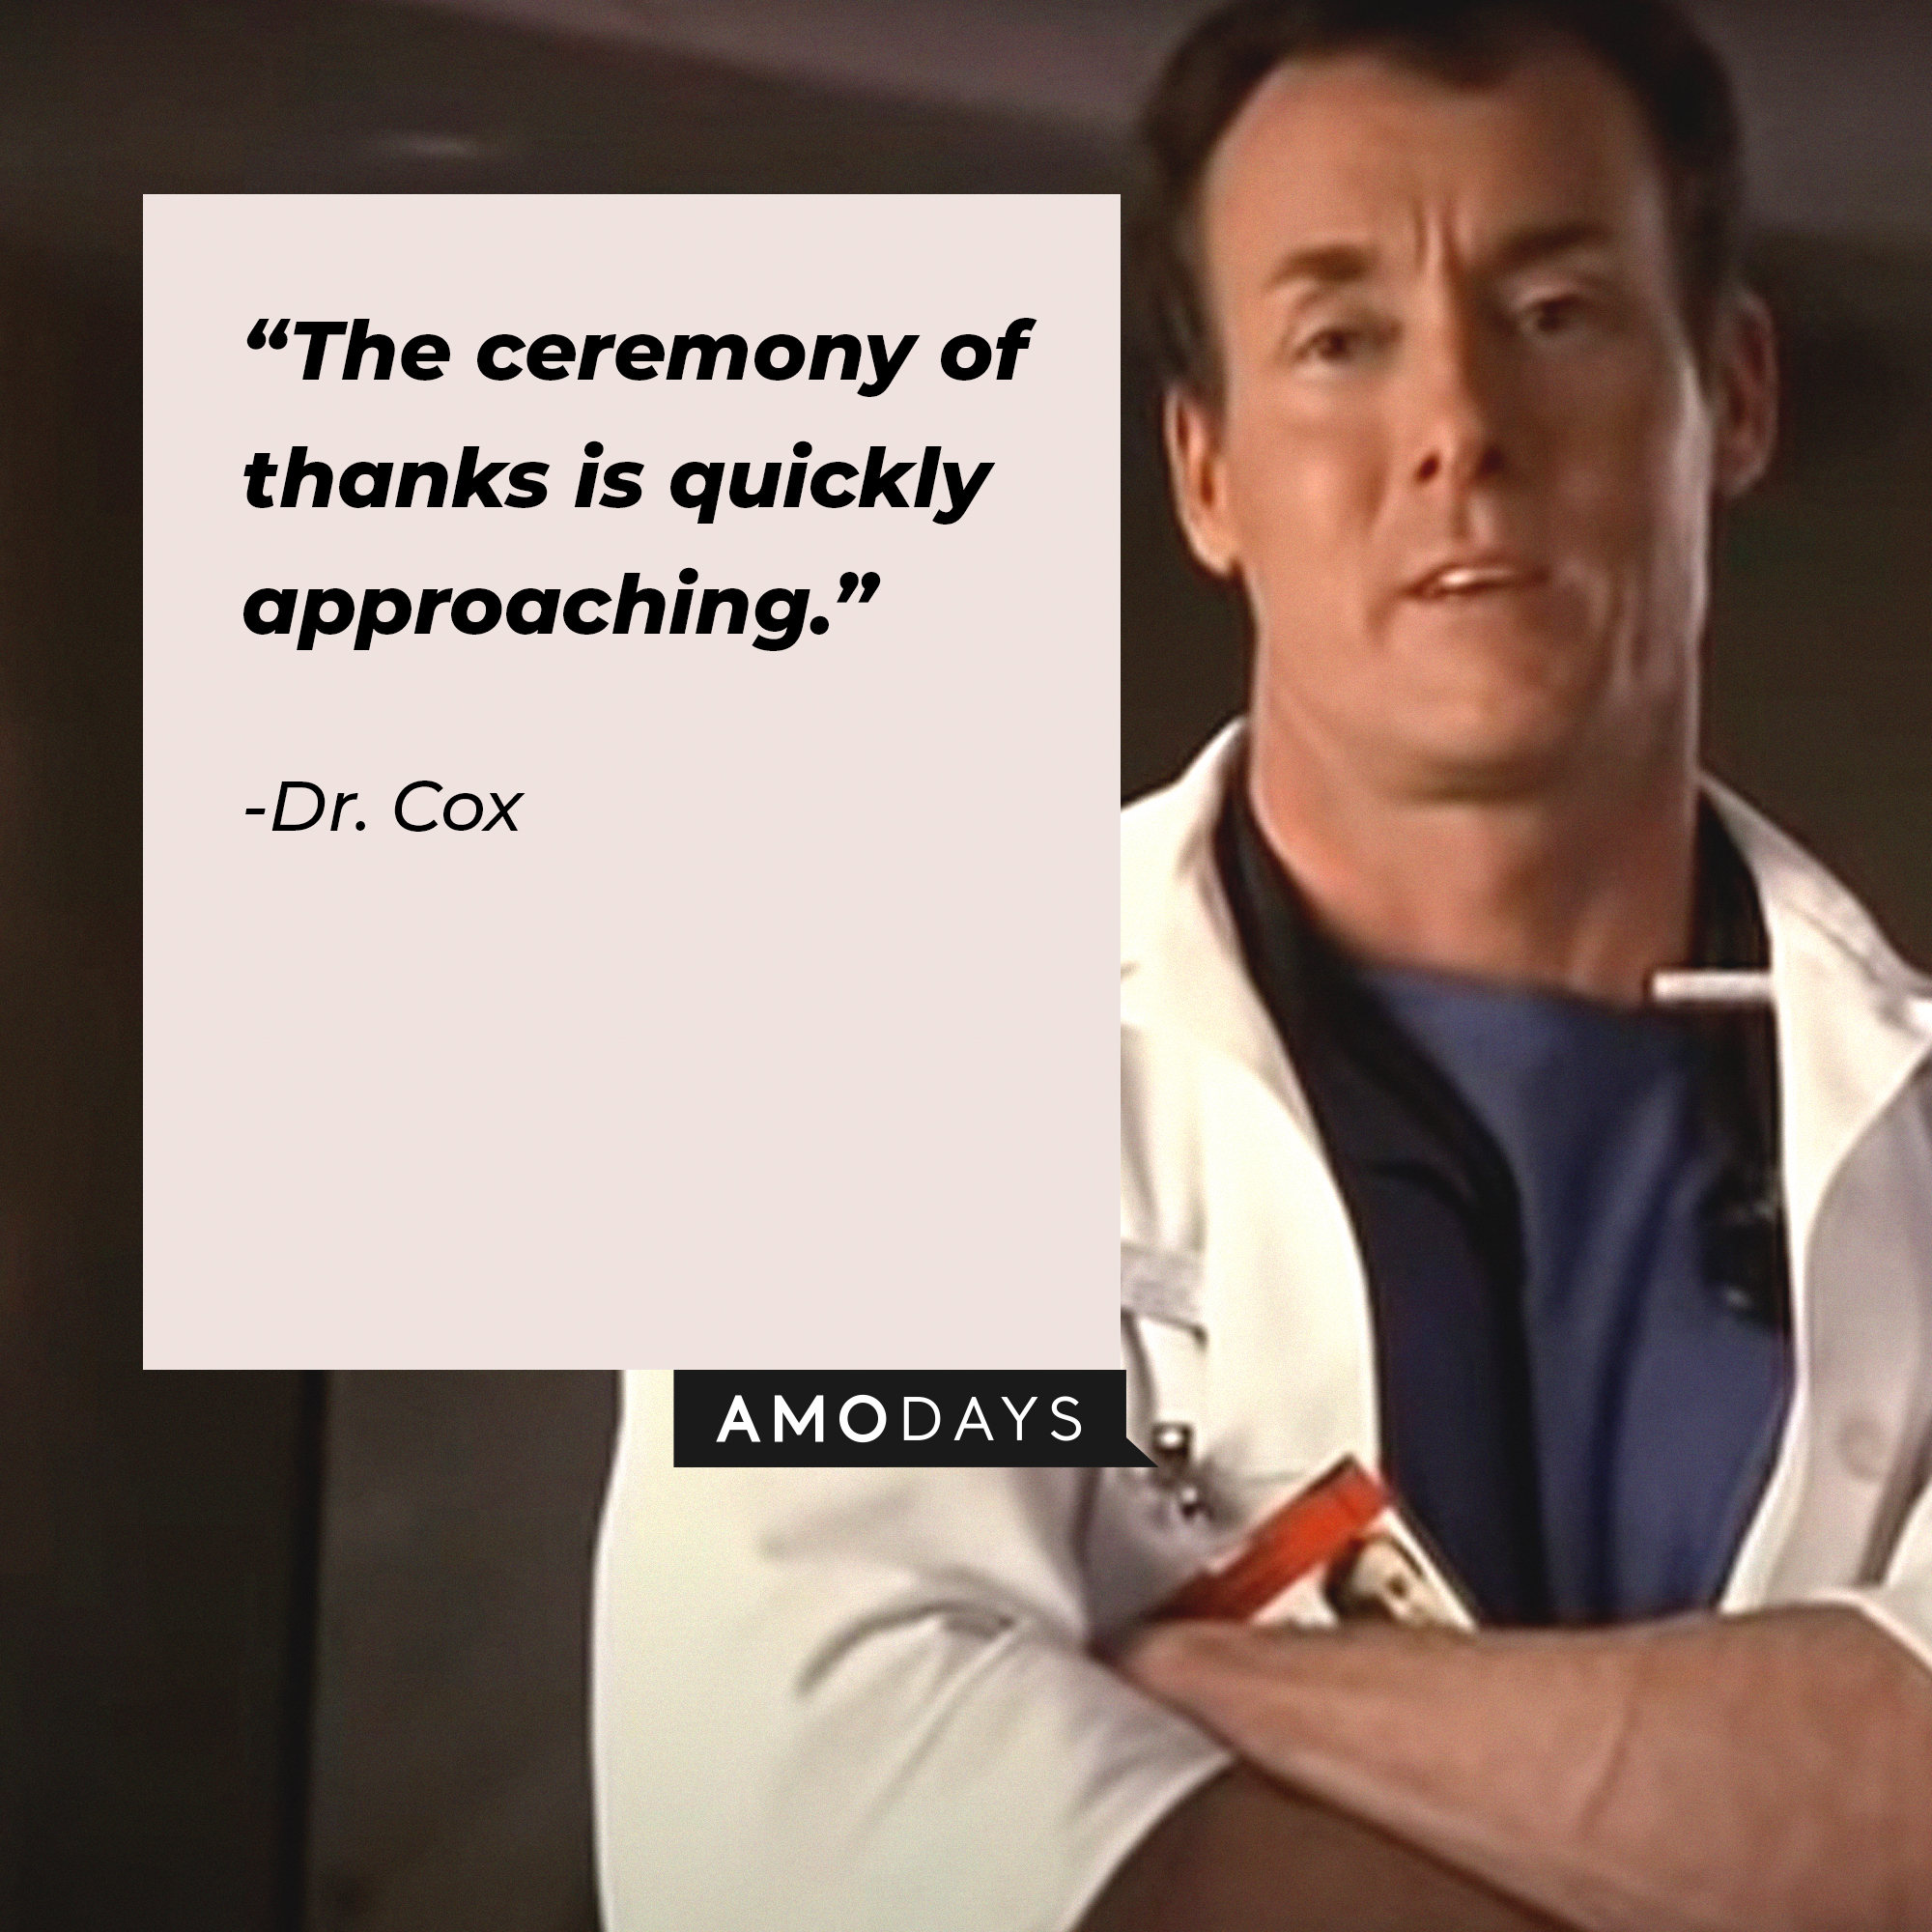 Dr. Cox, with his quote: “The ceremony of thanks is quickly approaching.” | Source: facebook.com/scrubs